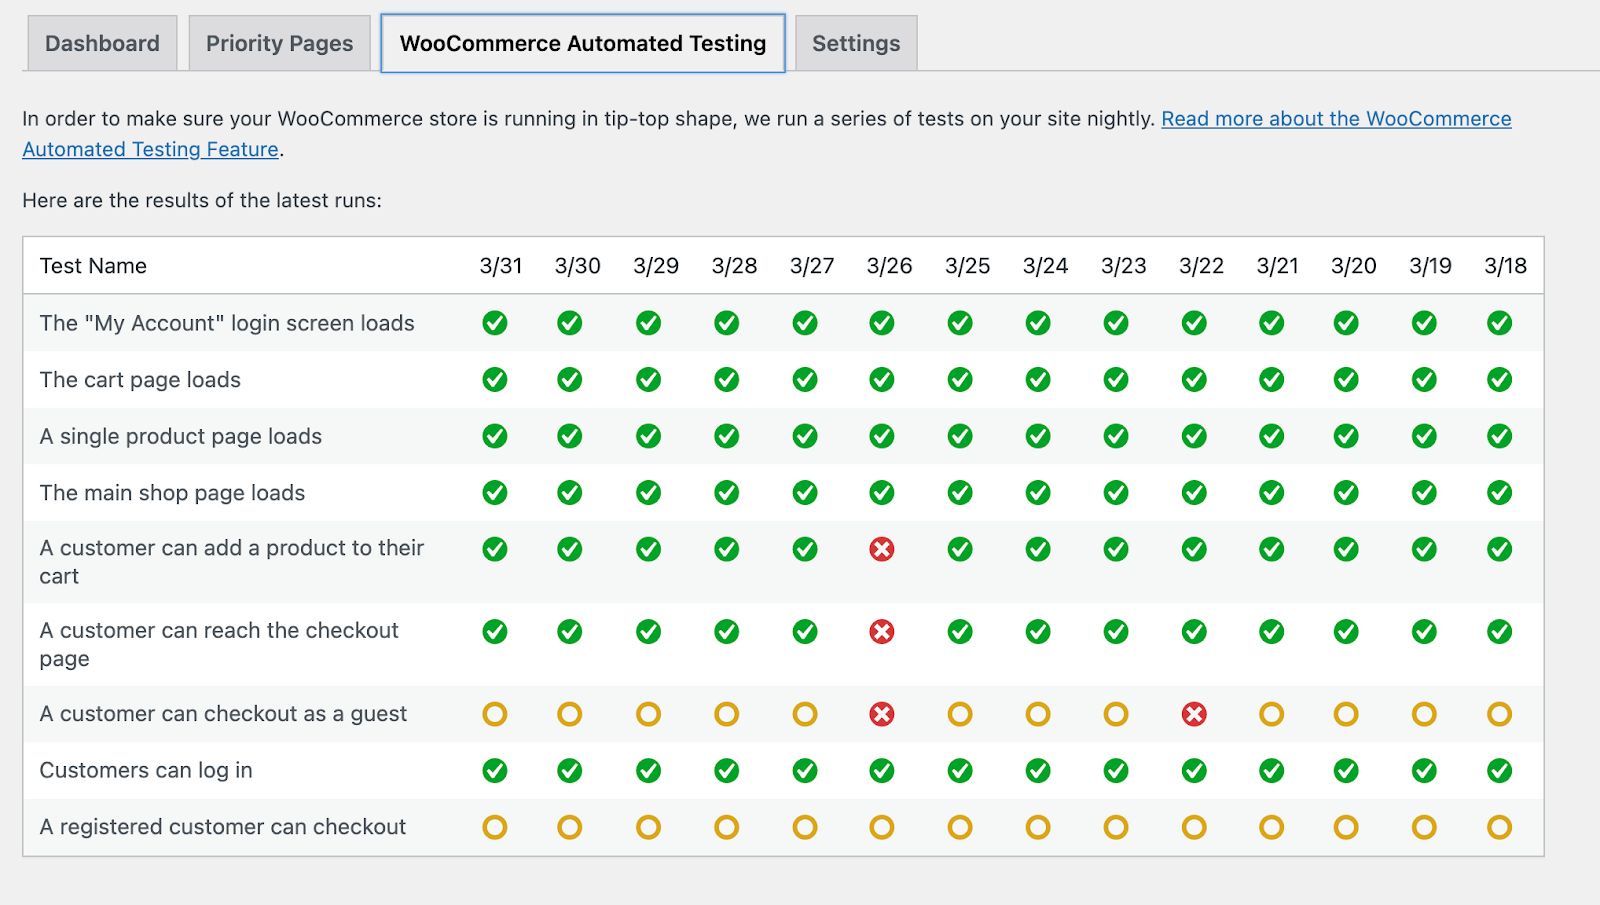 WooCommerce automated testing makes setting up an ecommerce site easy